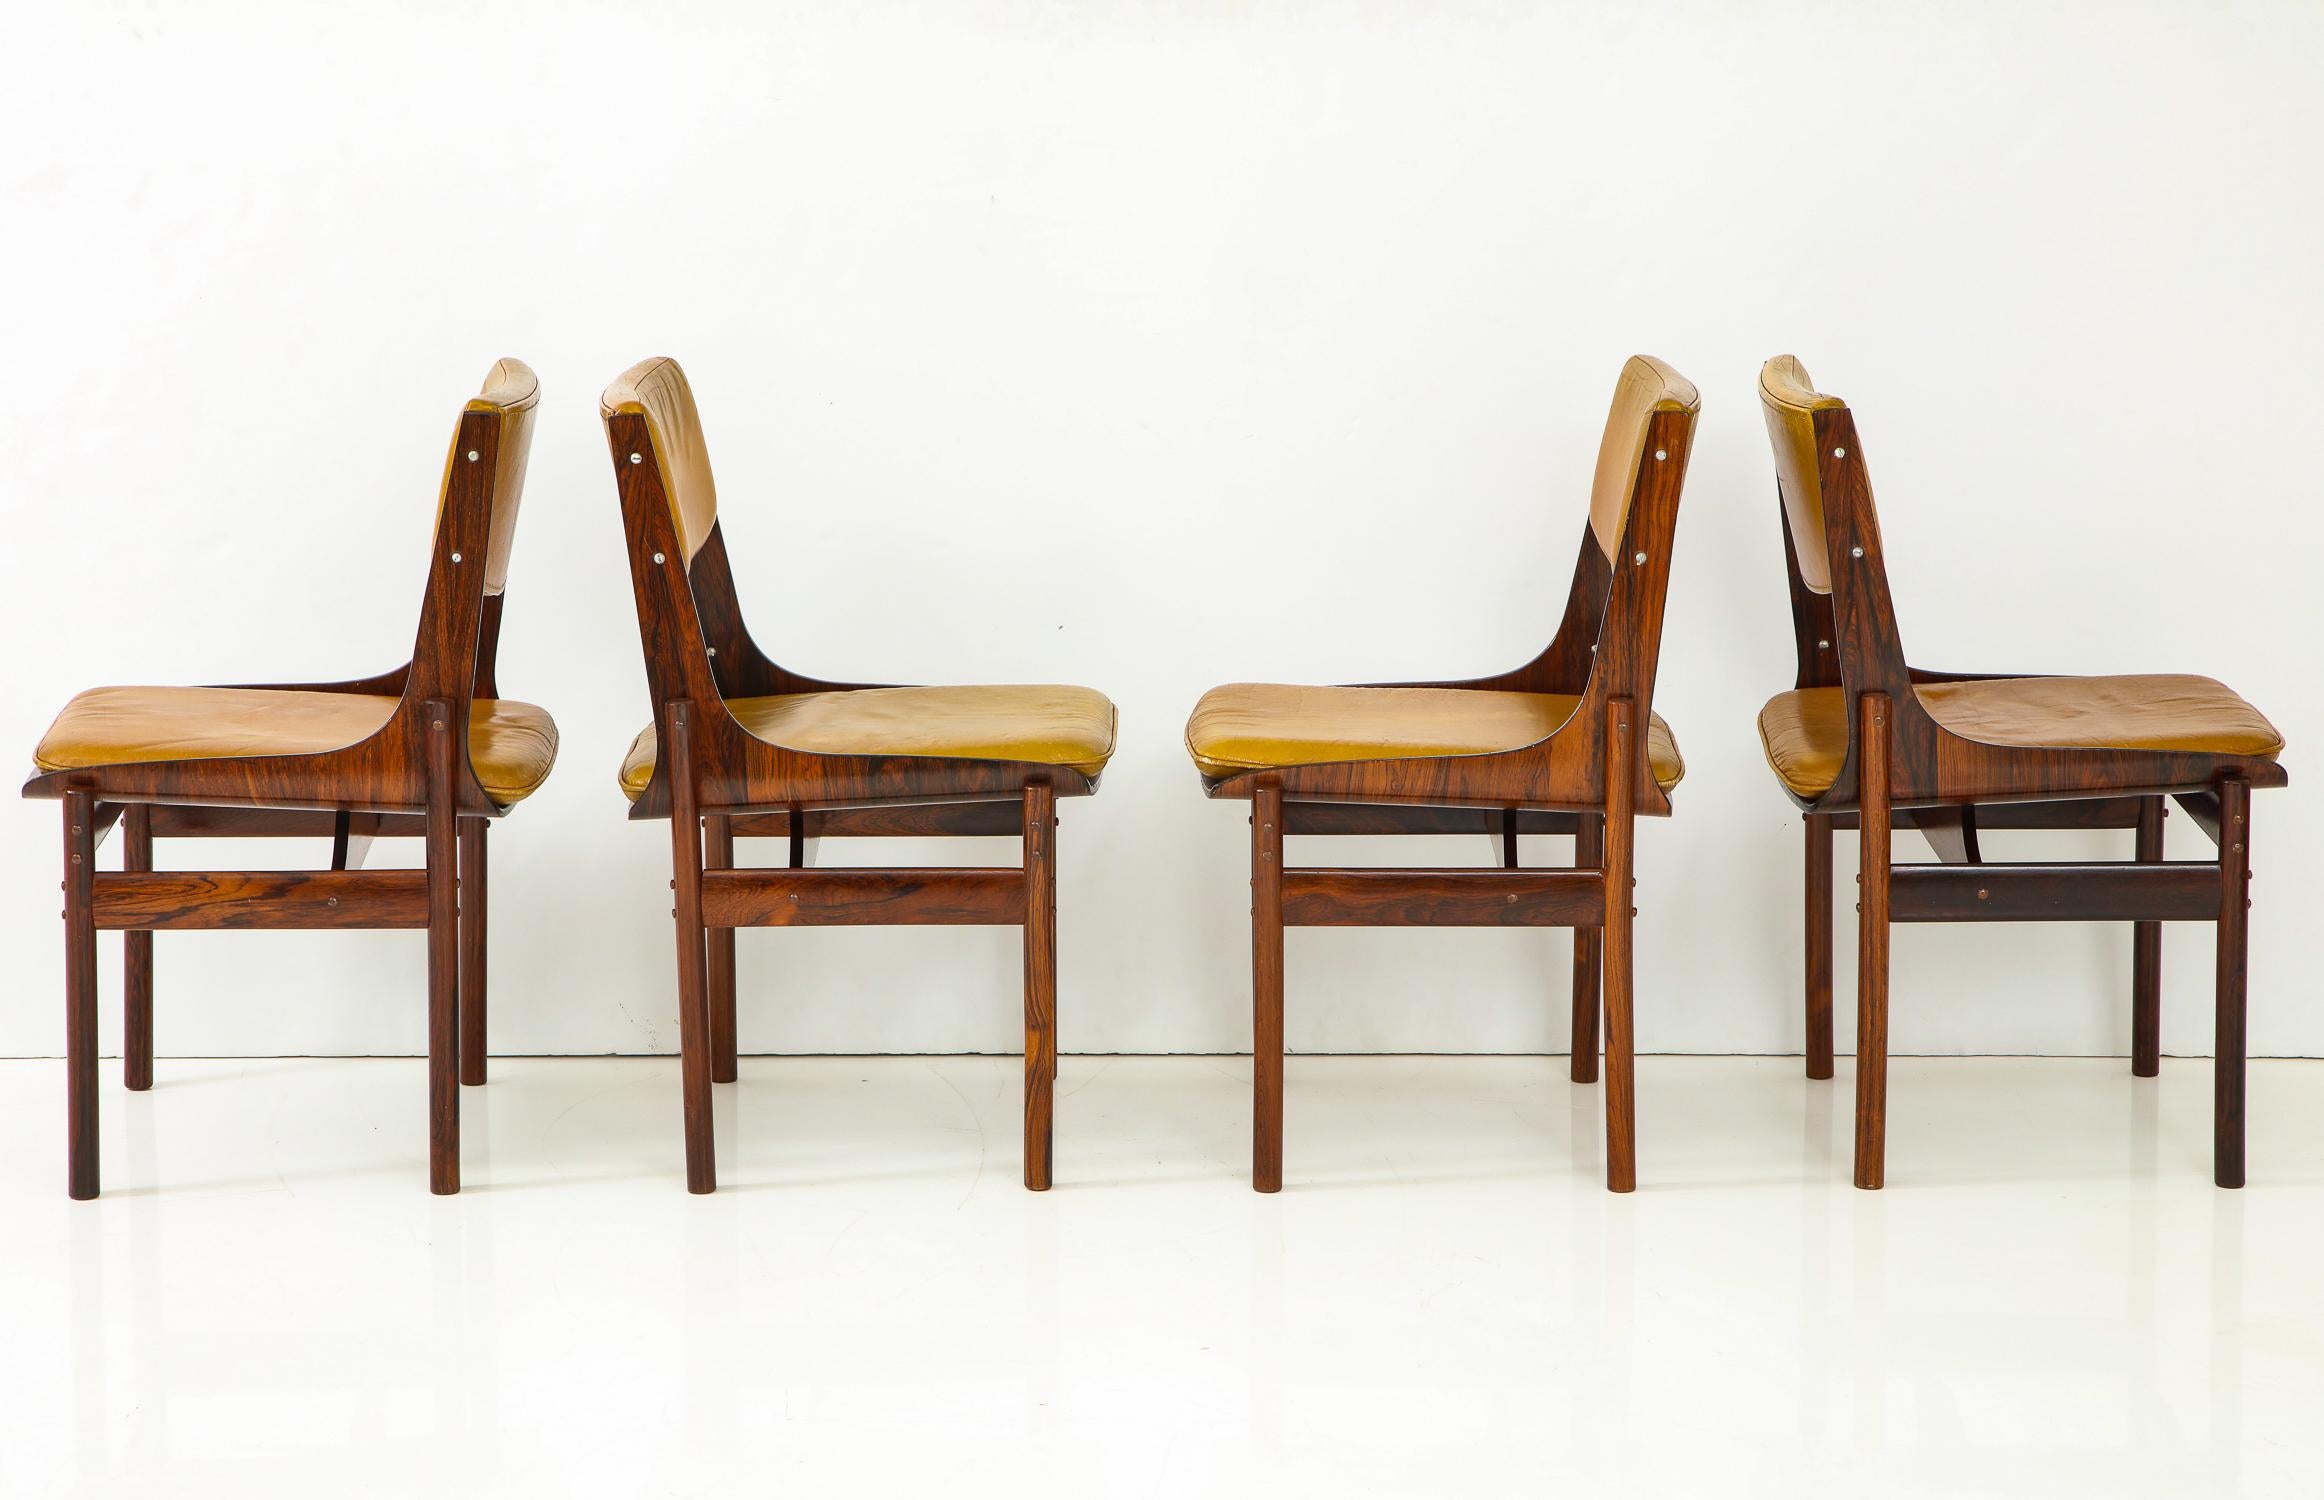 Brazilian Seat of Four Jacaranda and Leather Chairs from Brazil